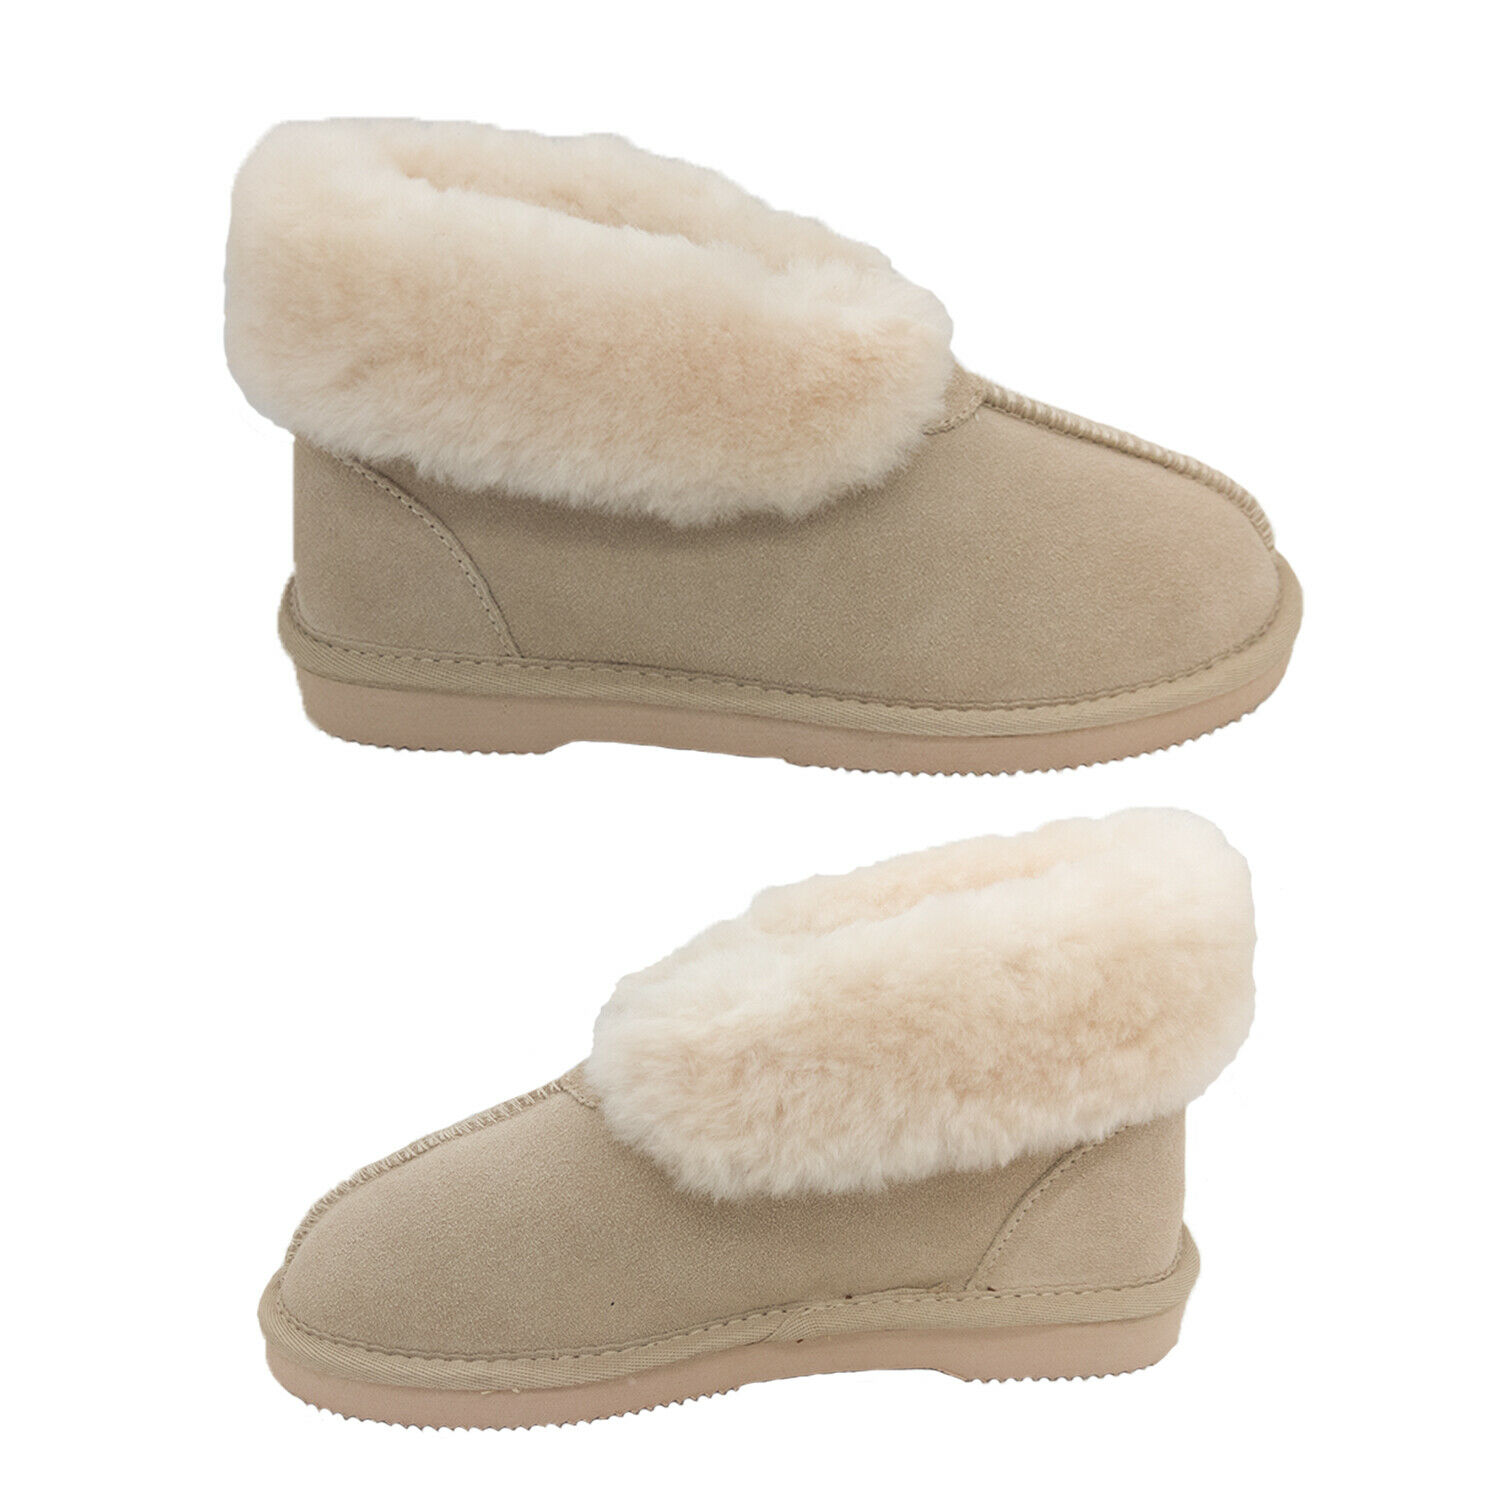 Ladies Slippers Uggs By Grosby Princess Leather Sheepskin Lining Size 5 ...